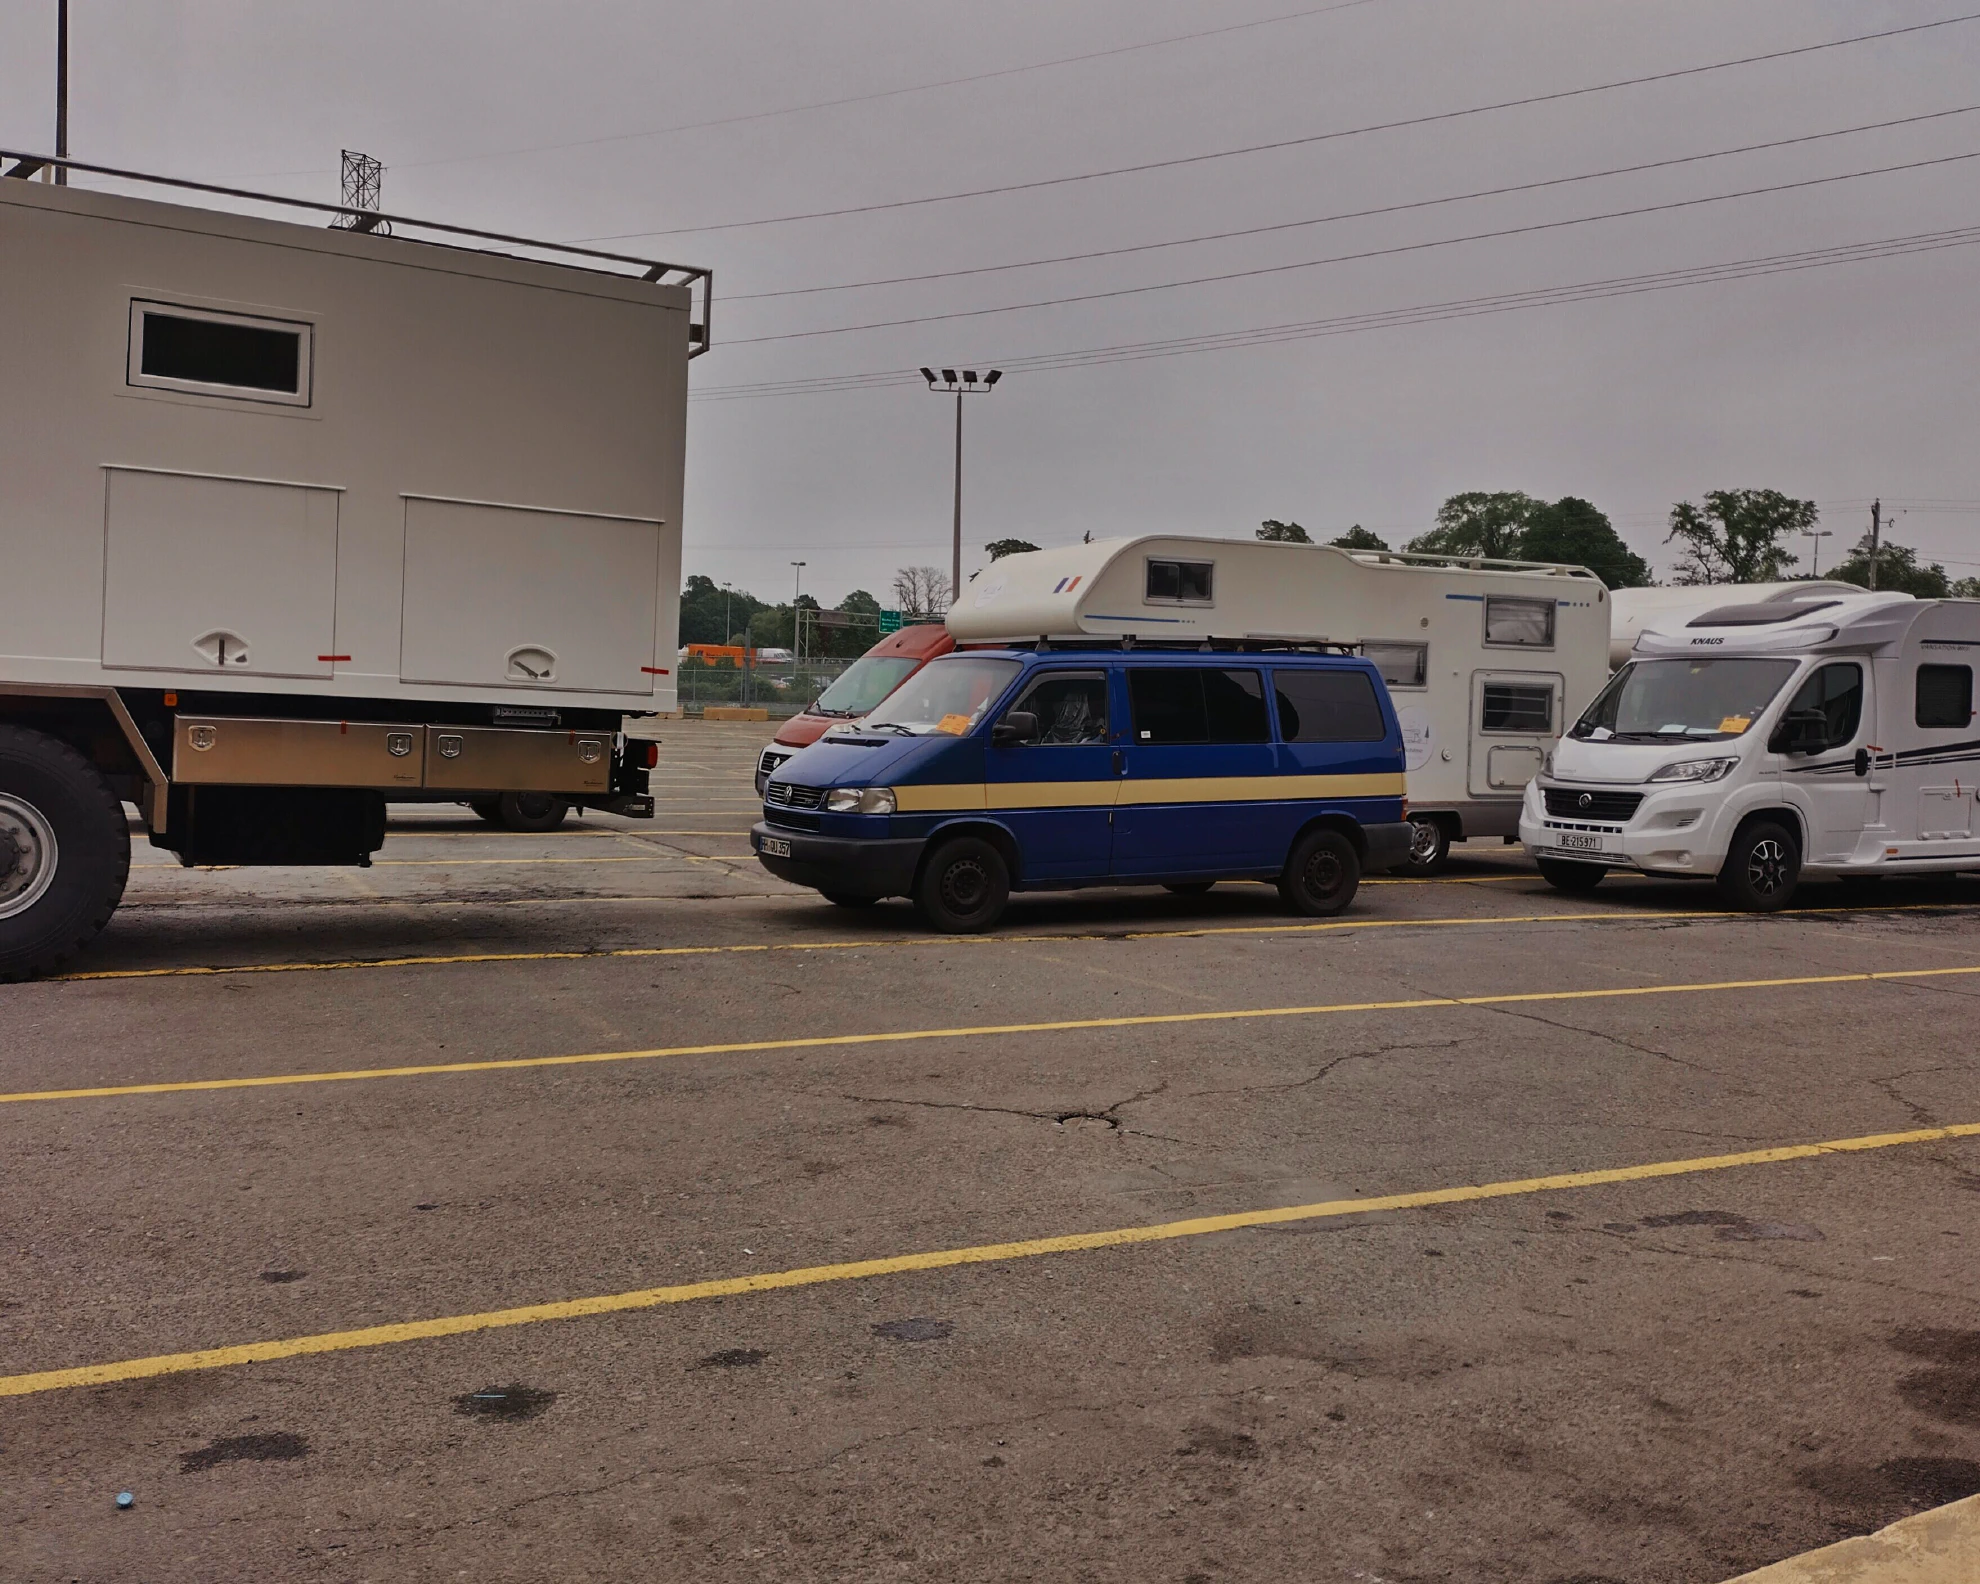 Our small blue Bulli at the Harbour of Halifax.
Between all the other Campers, ours seems to be so tiny.
